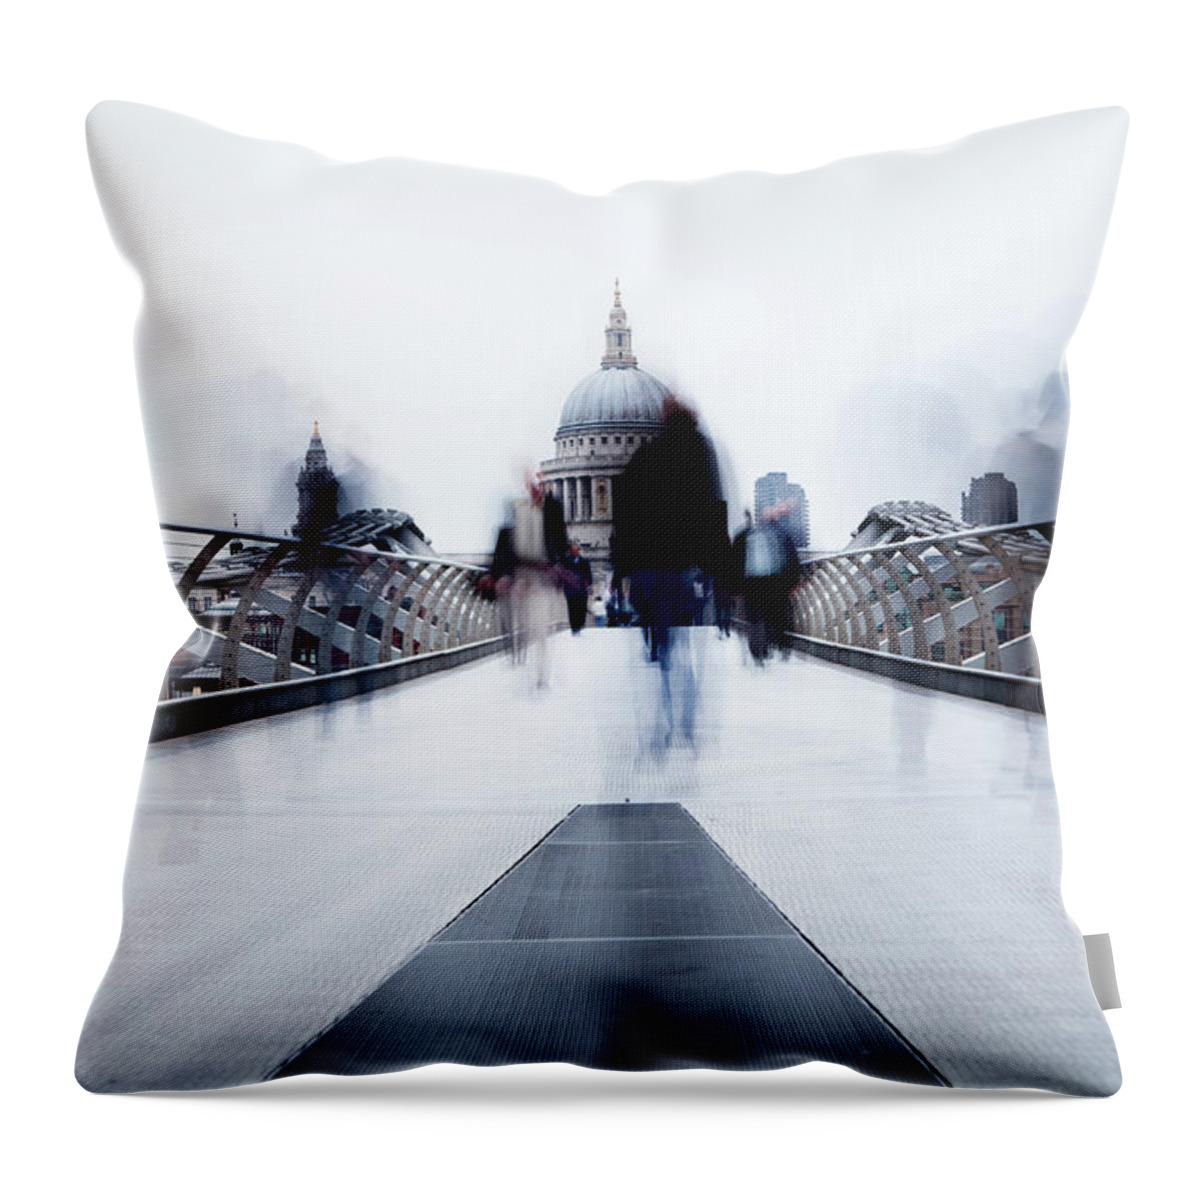 London Millennium Footbridge Throw Pillow featuring the photograph Commuters by Lightkey